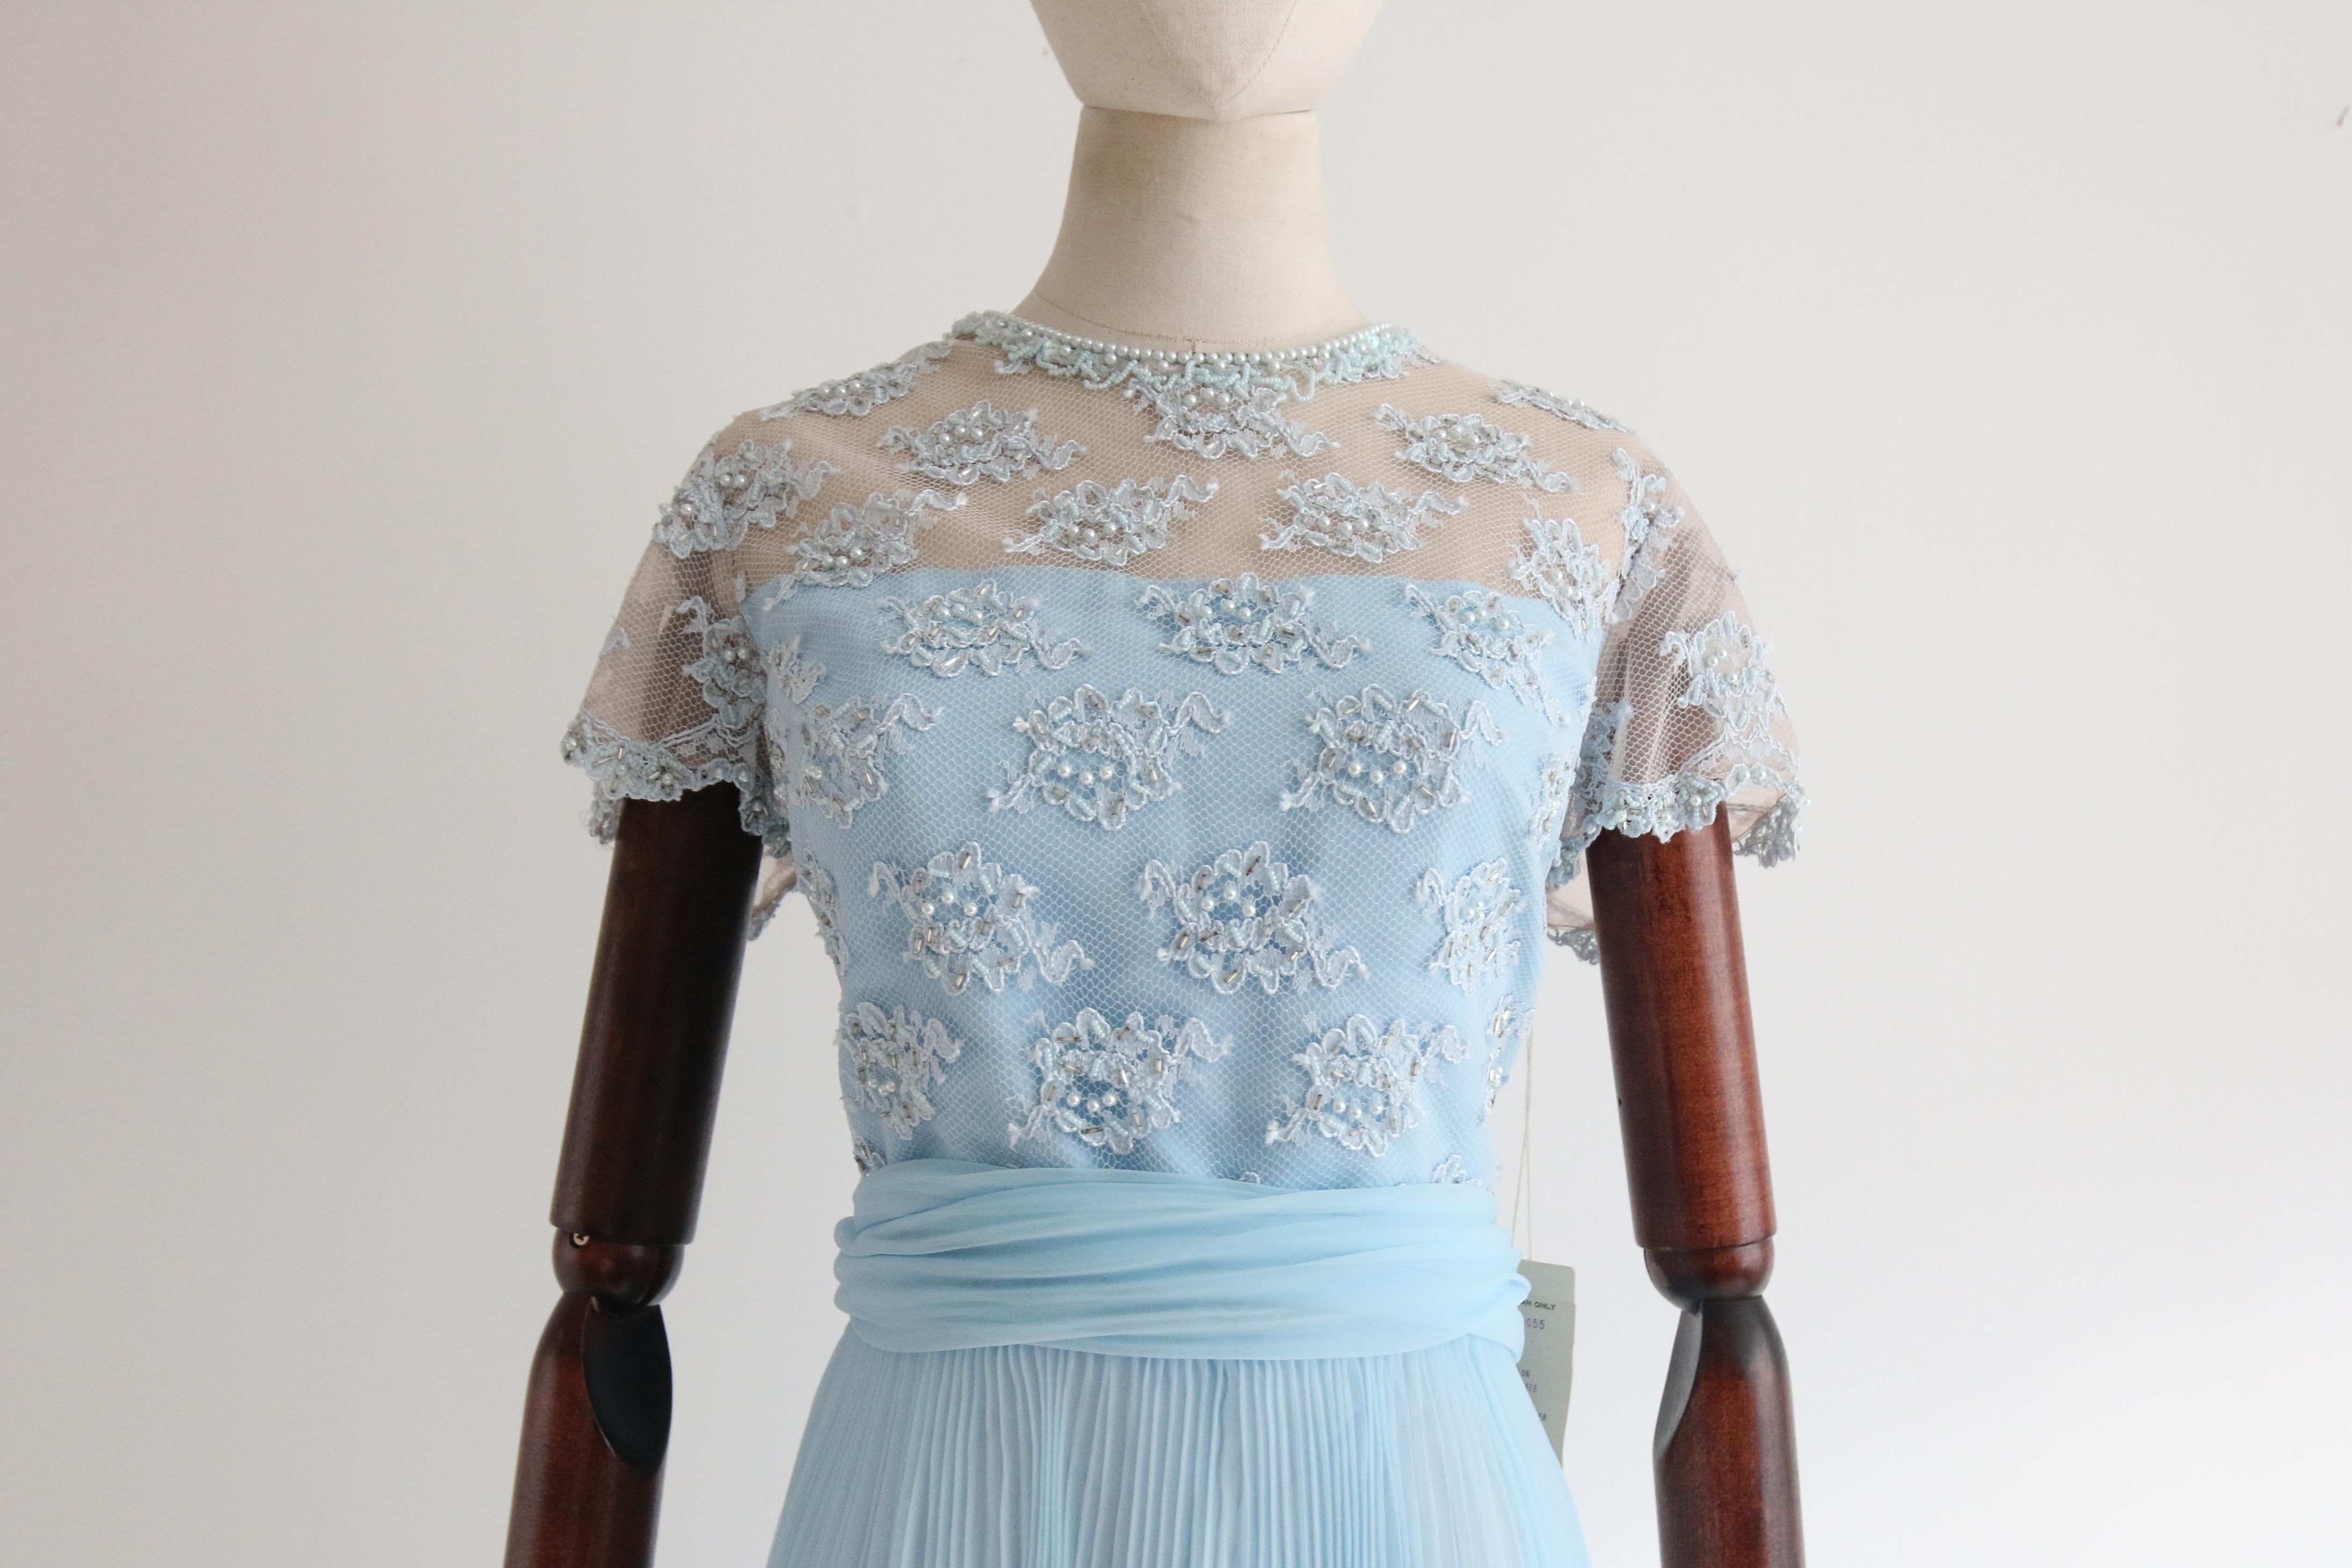 Women's Vintage 1960's Ice Blue Chiffon and Lace Pleated Dress UK 12 US 8 For Sale